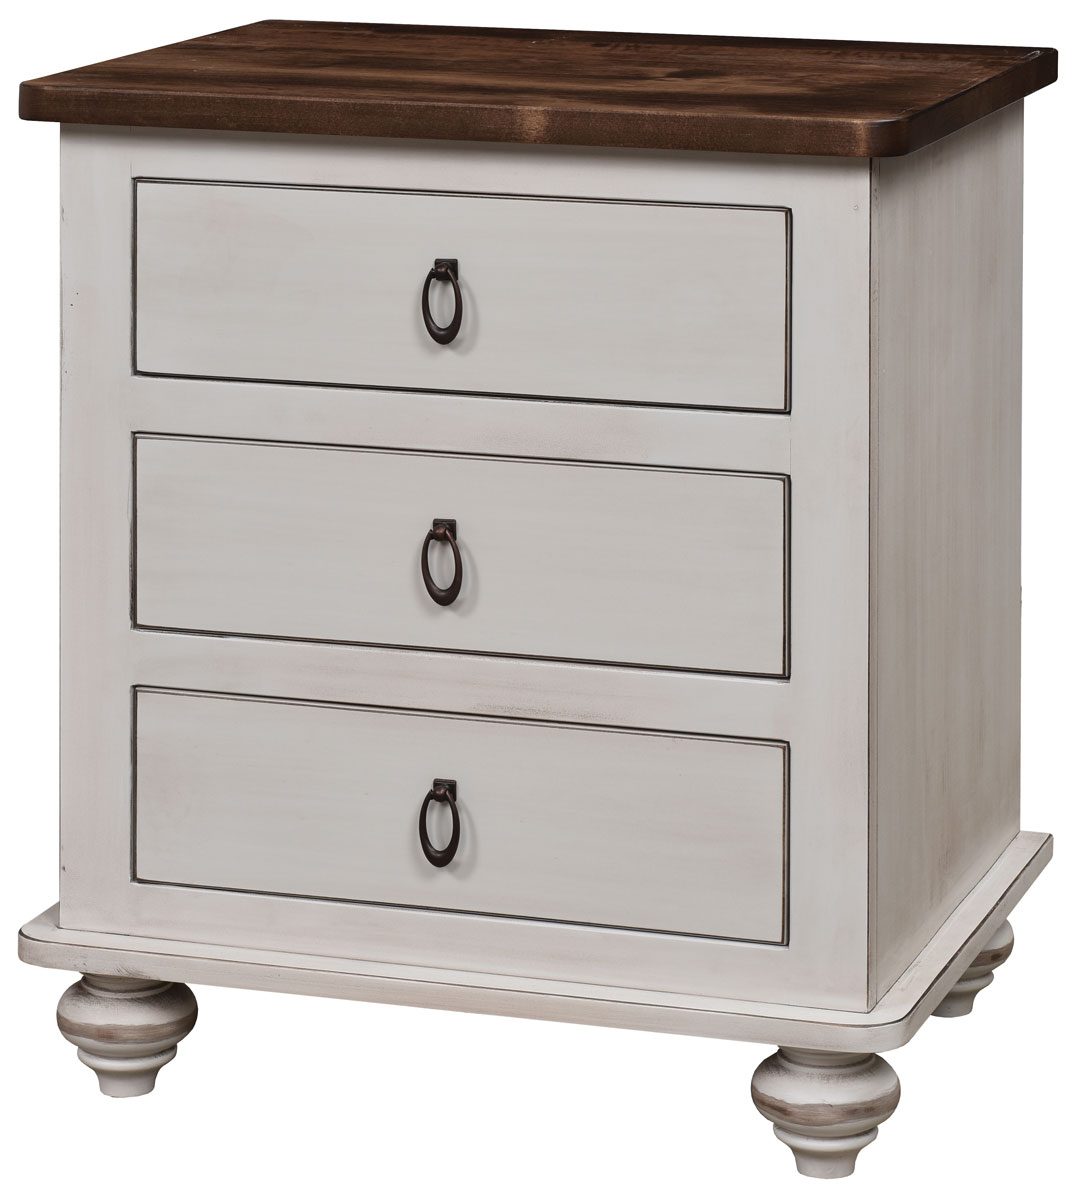 Cottage Grove 3 Drawer Nightstand